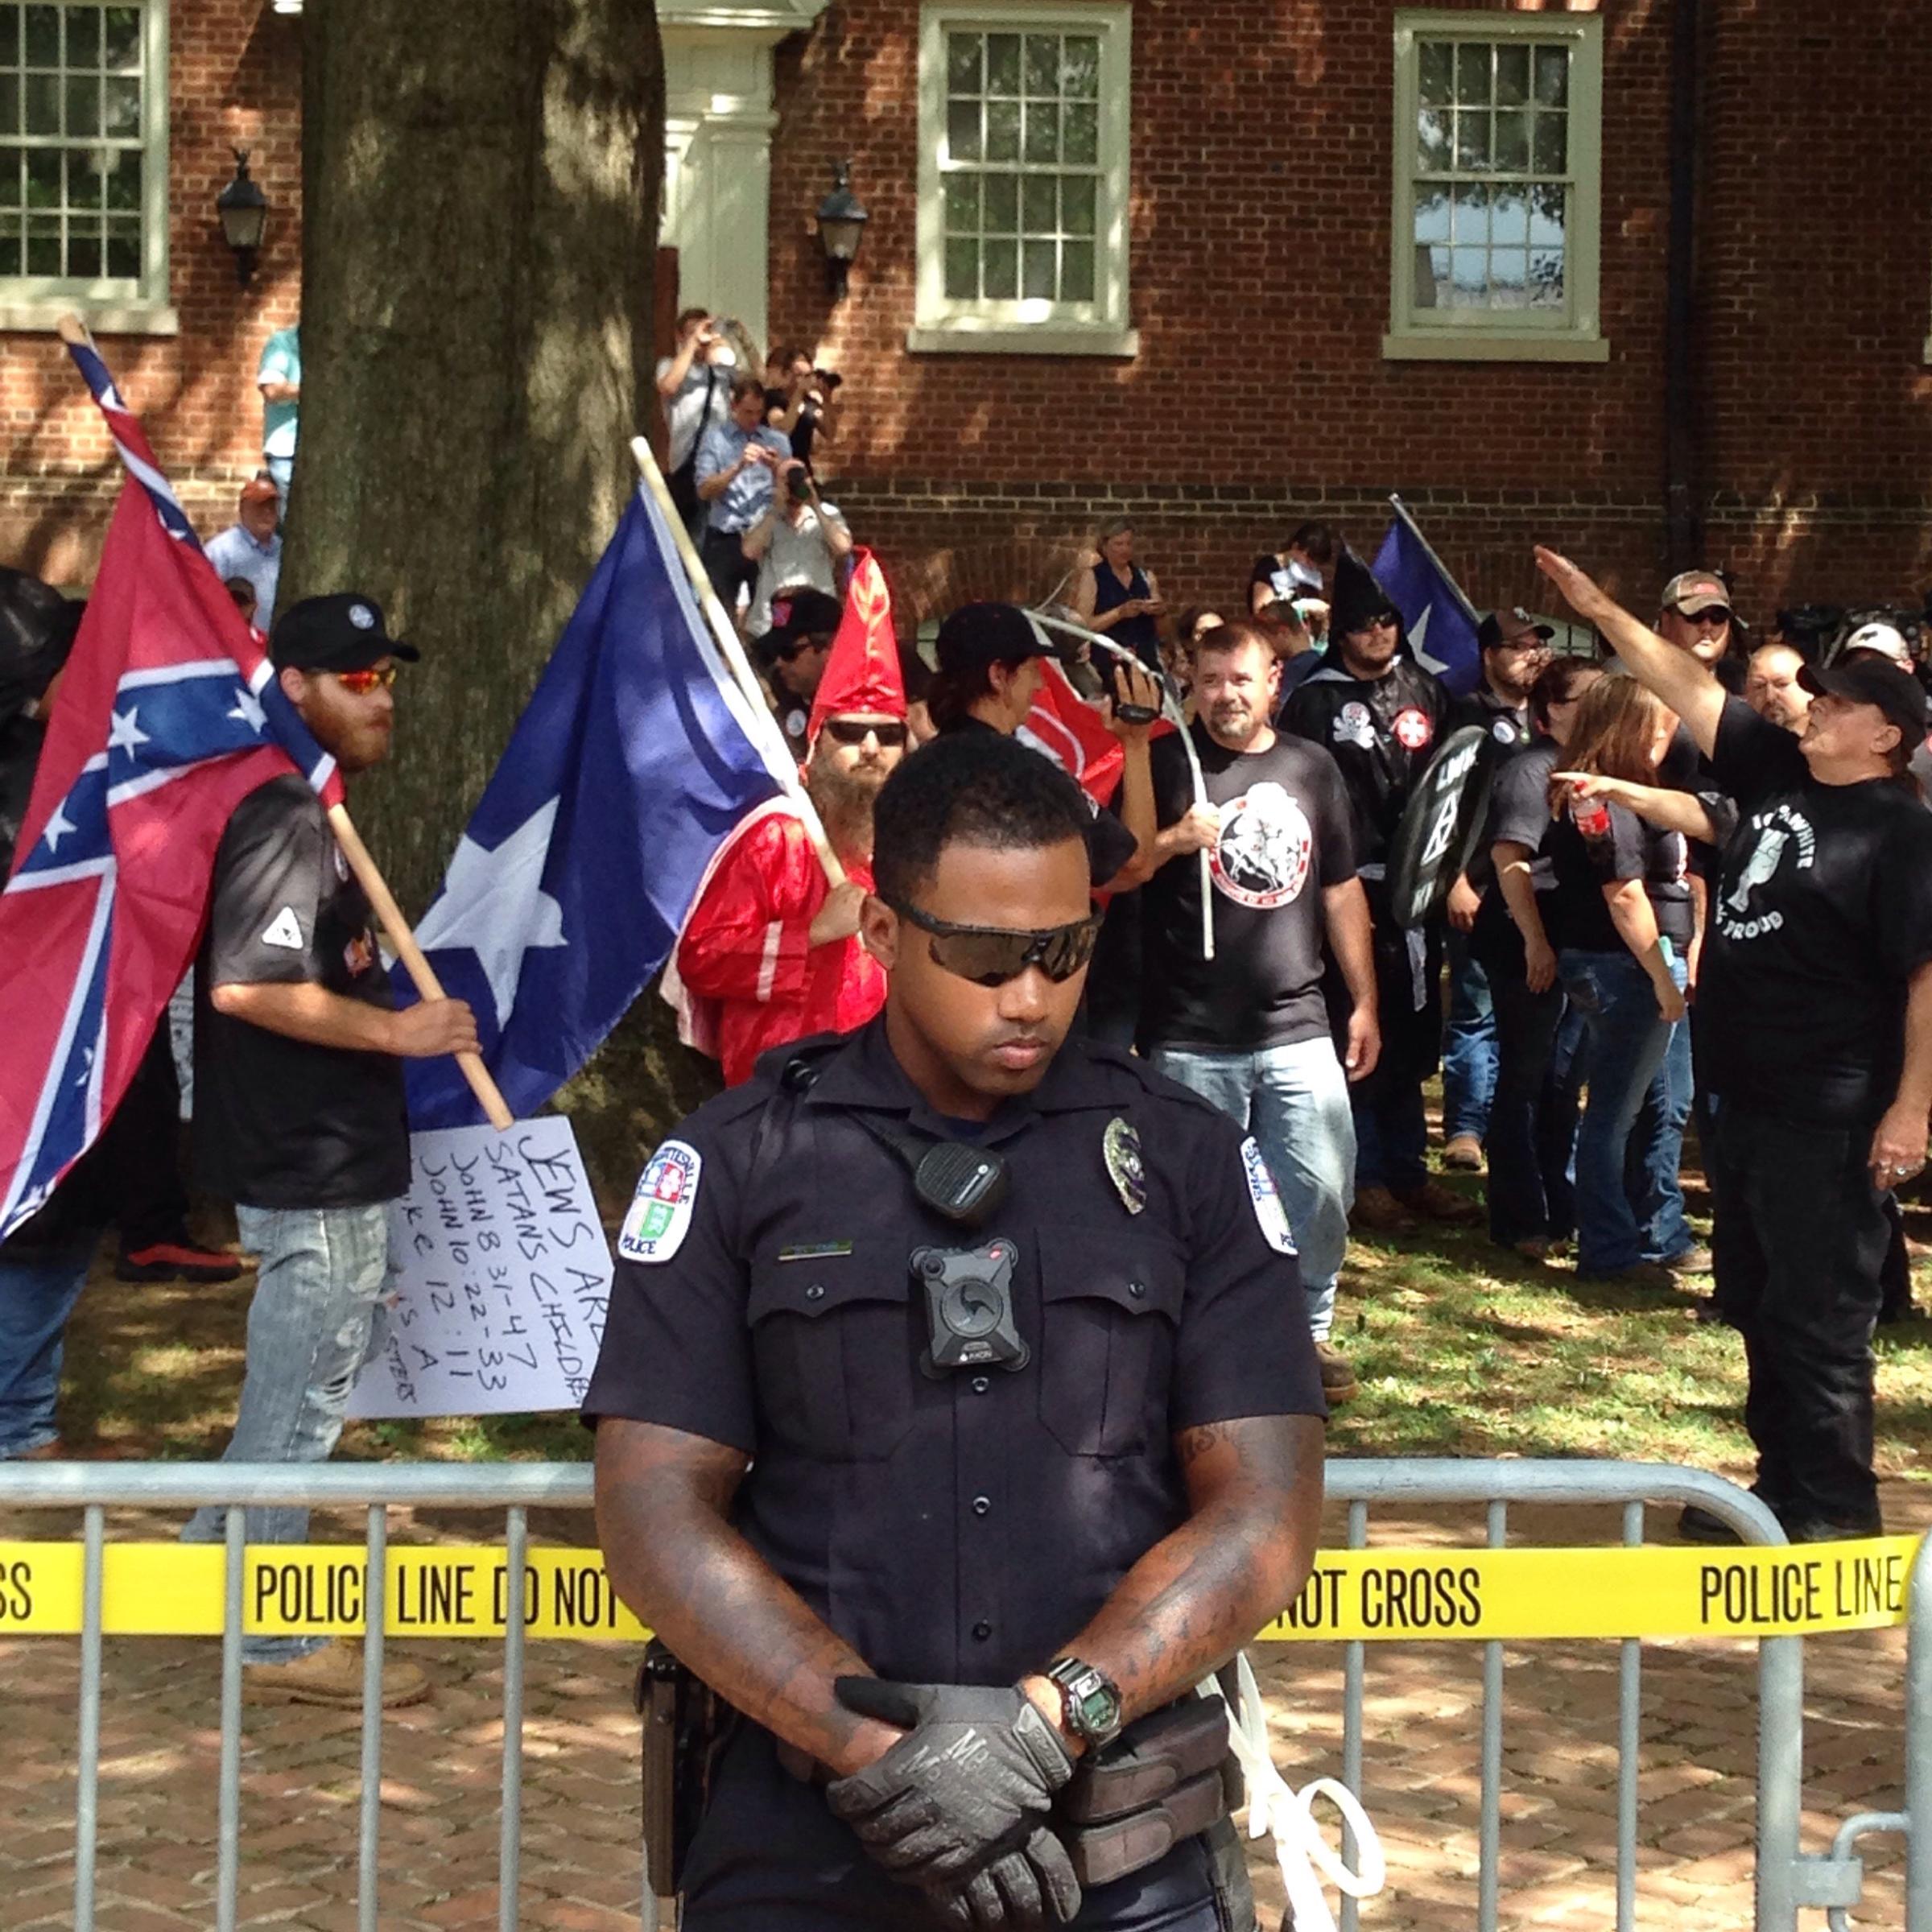 An officer patrols in front of a recent KKK rally in Charlottesville, Va.